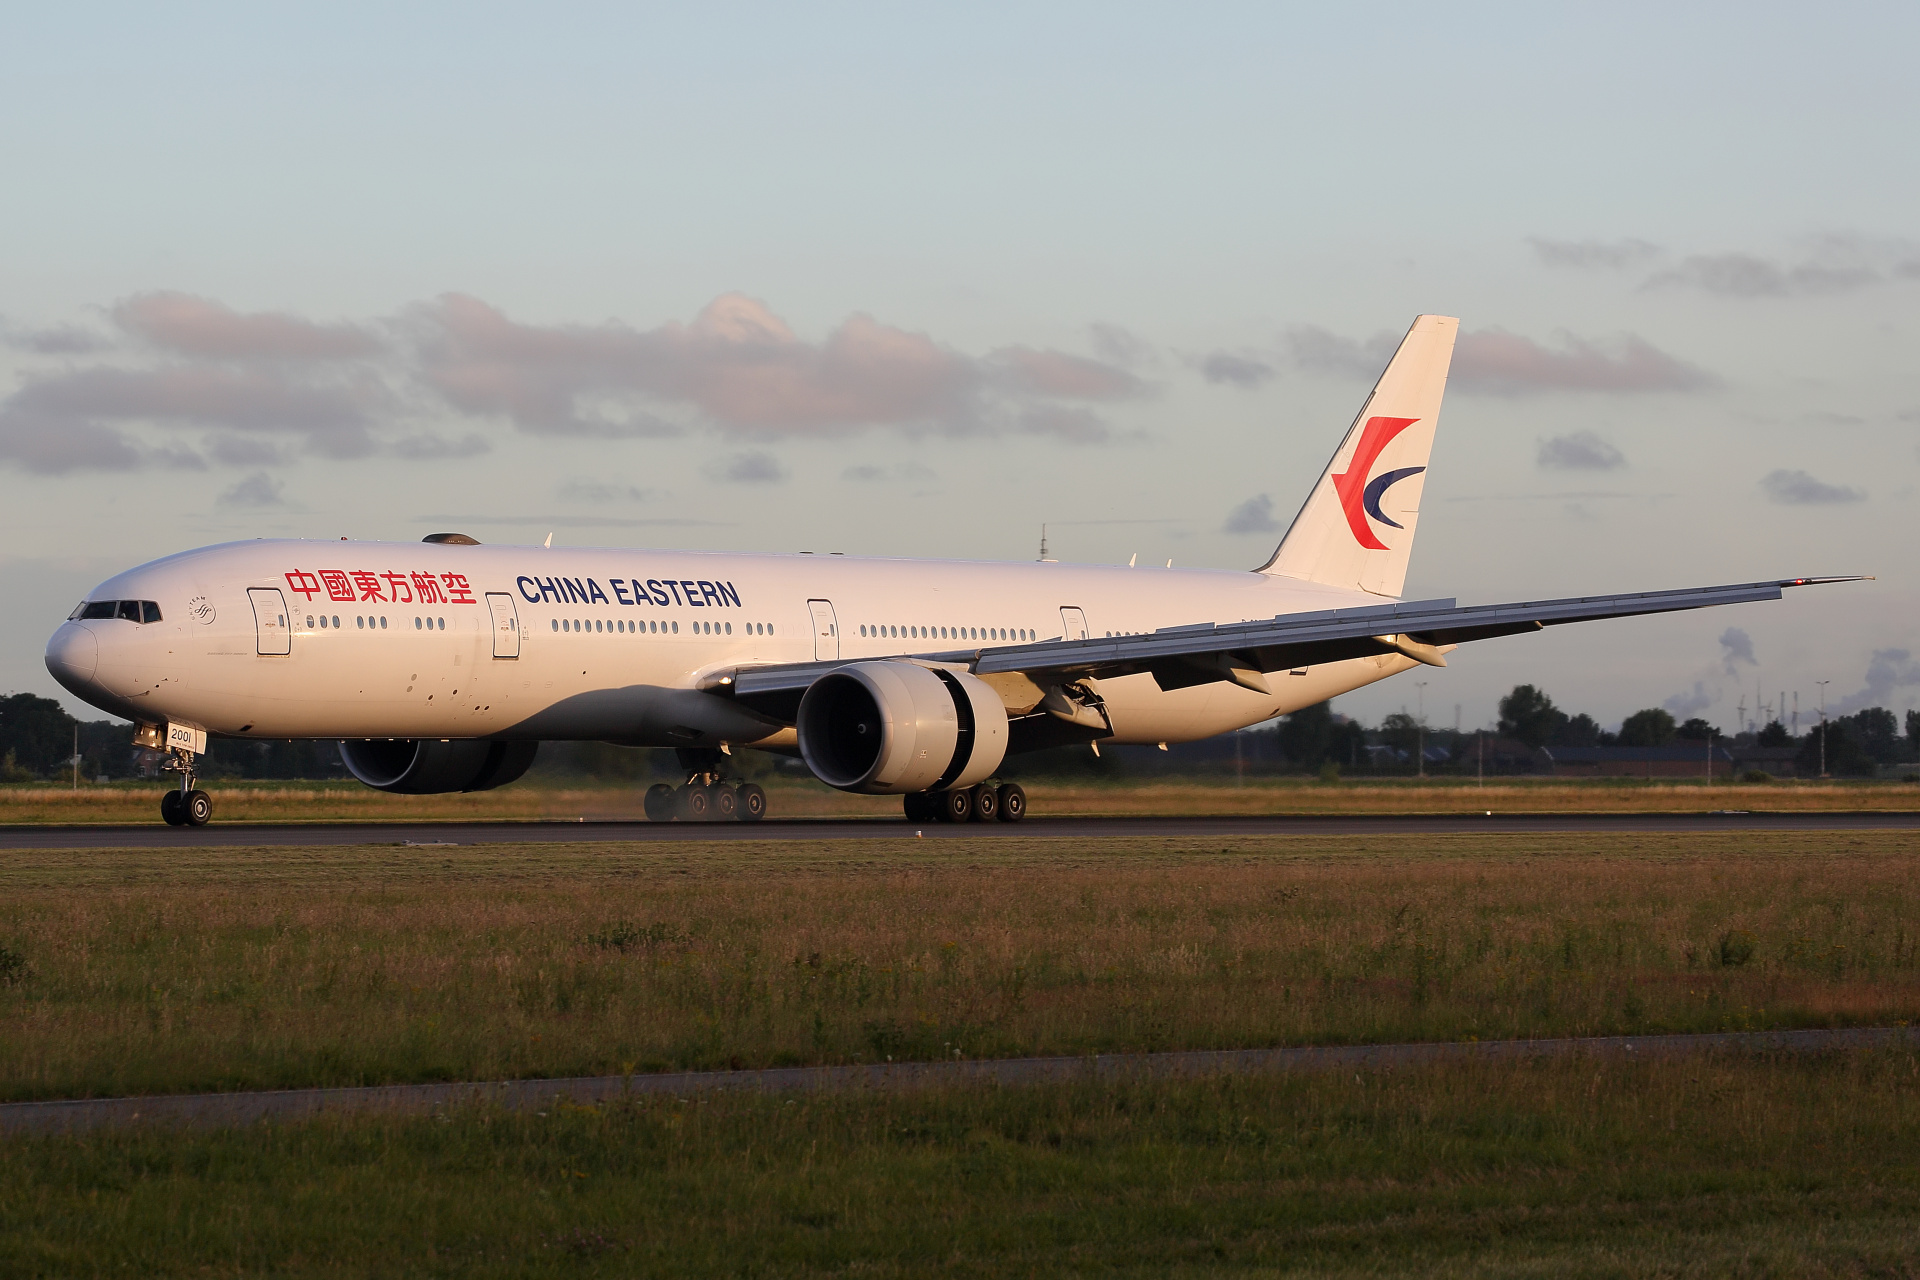 B-2001, China Eastern Airlines (Aircraft » Schiphol Spotting » Boeing 777-300ER)